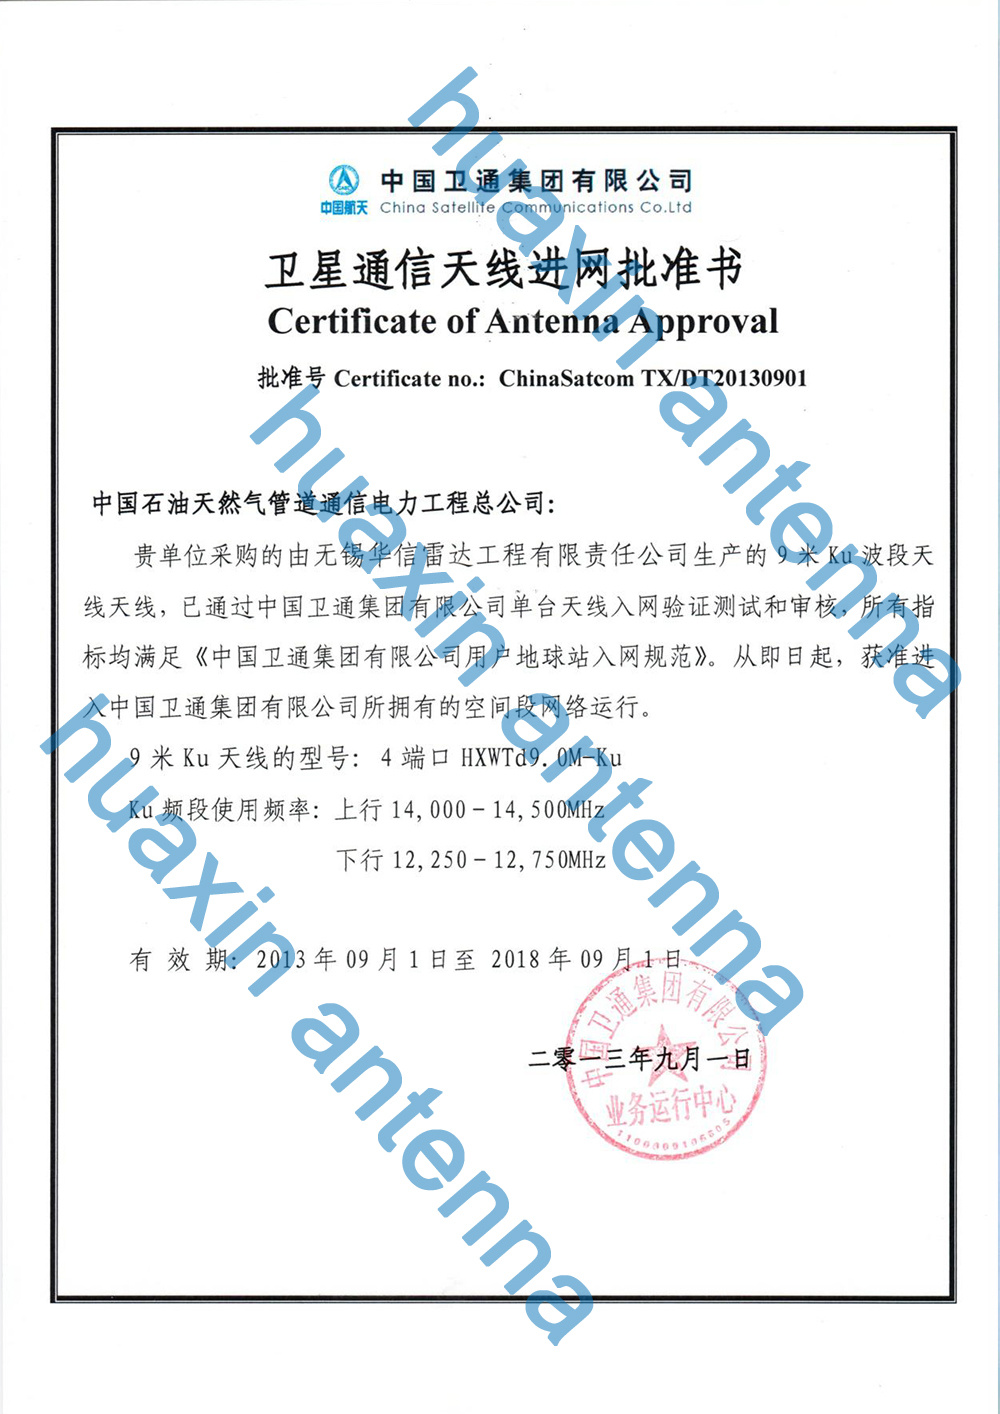 Chinasatcom Certificate of 9m Antenna Approval